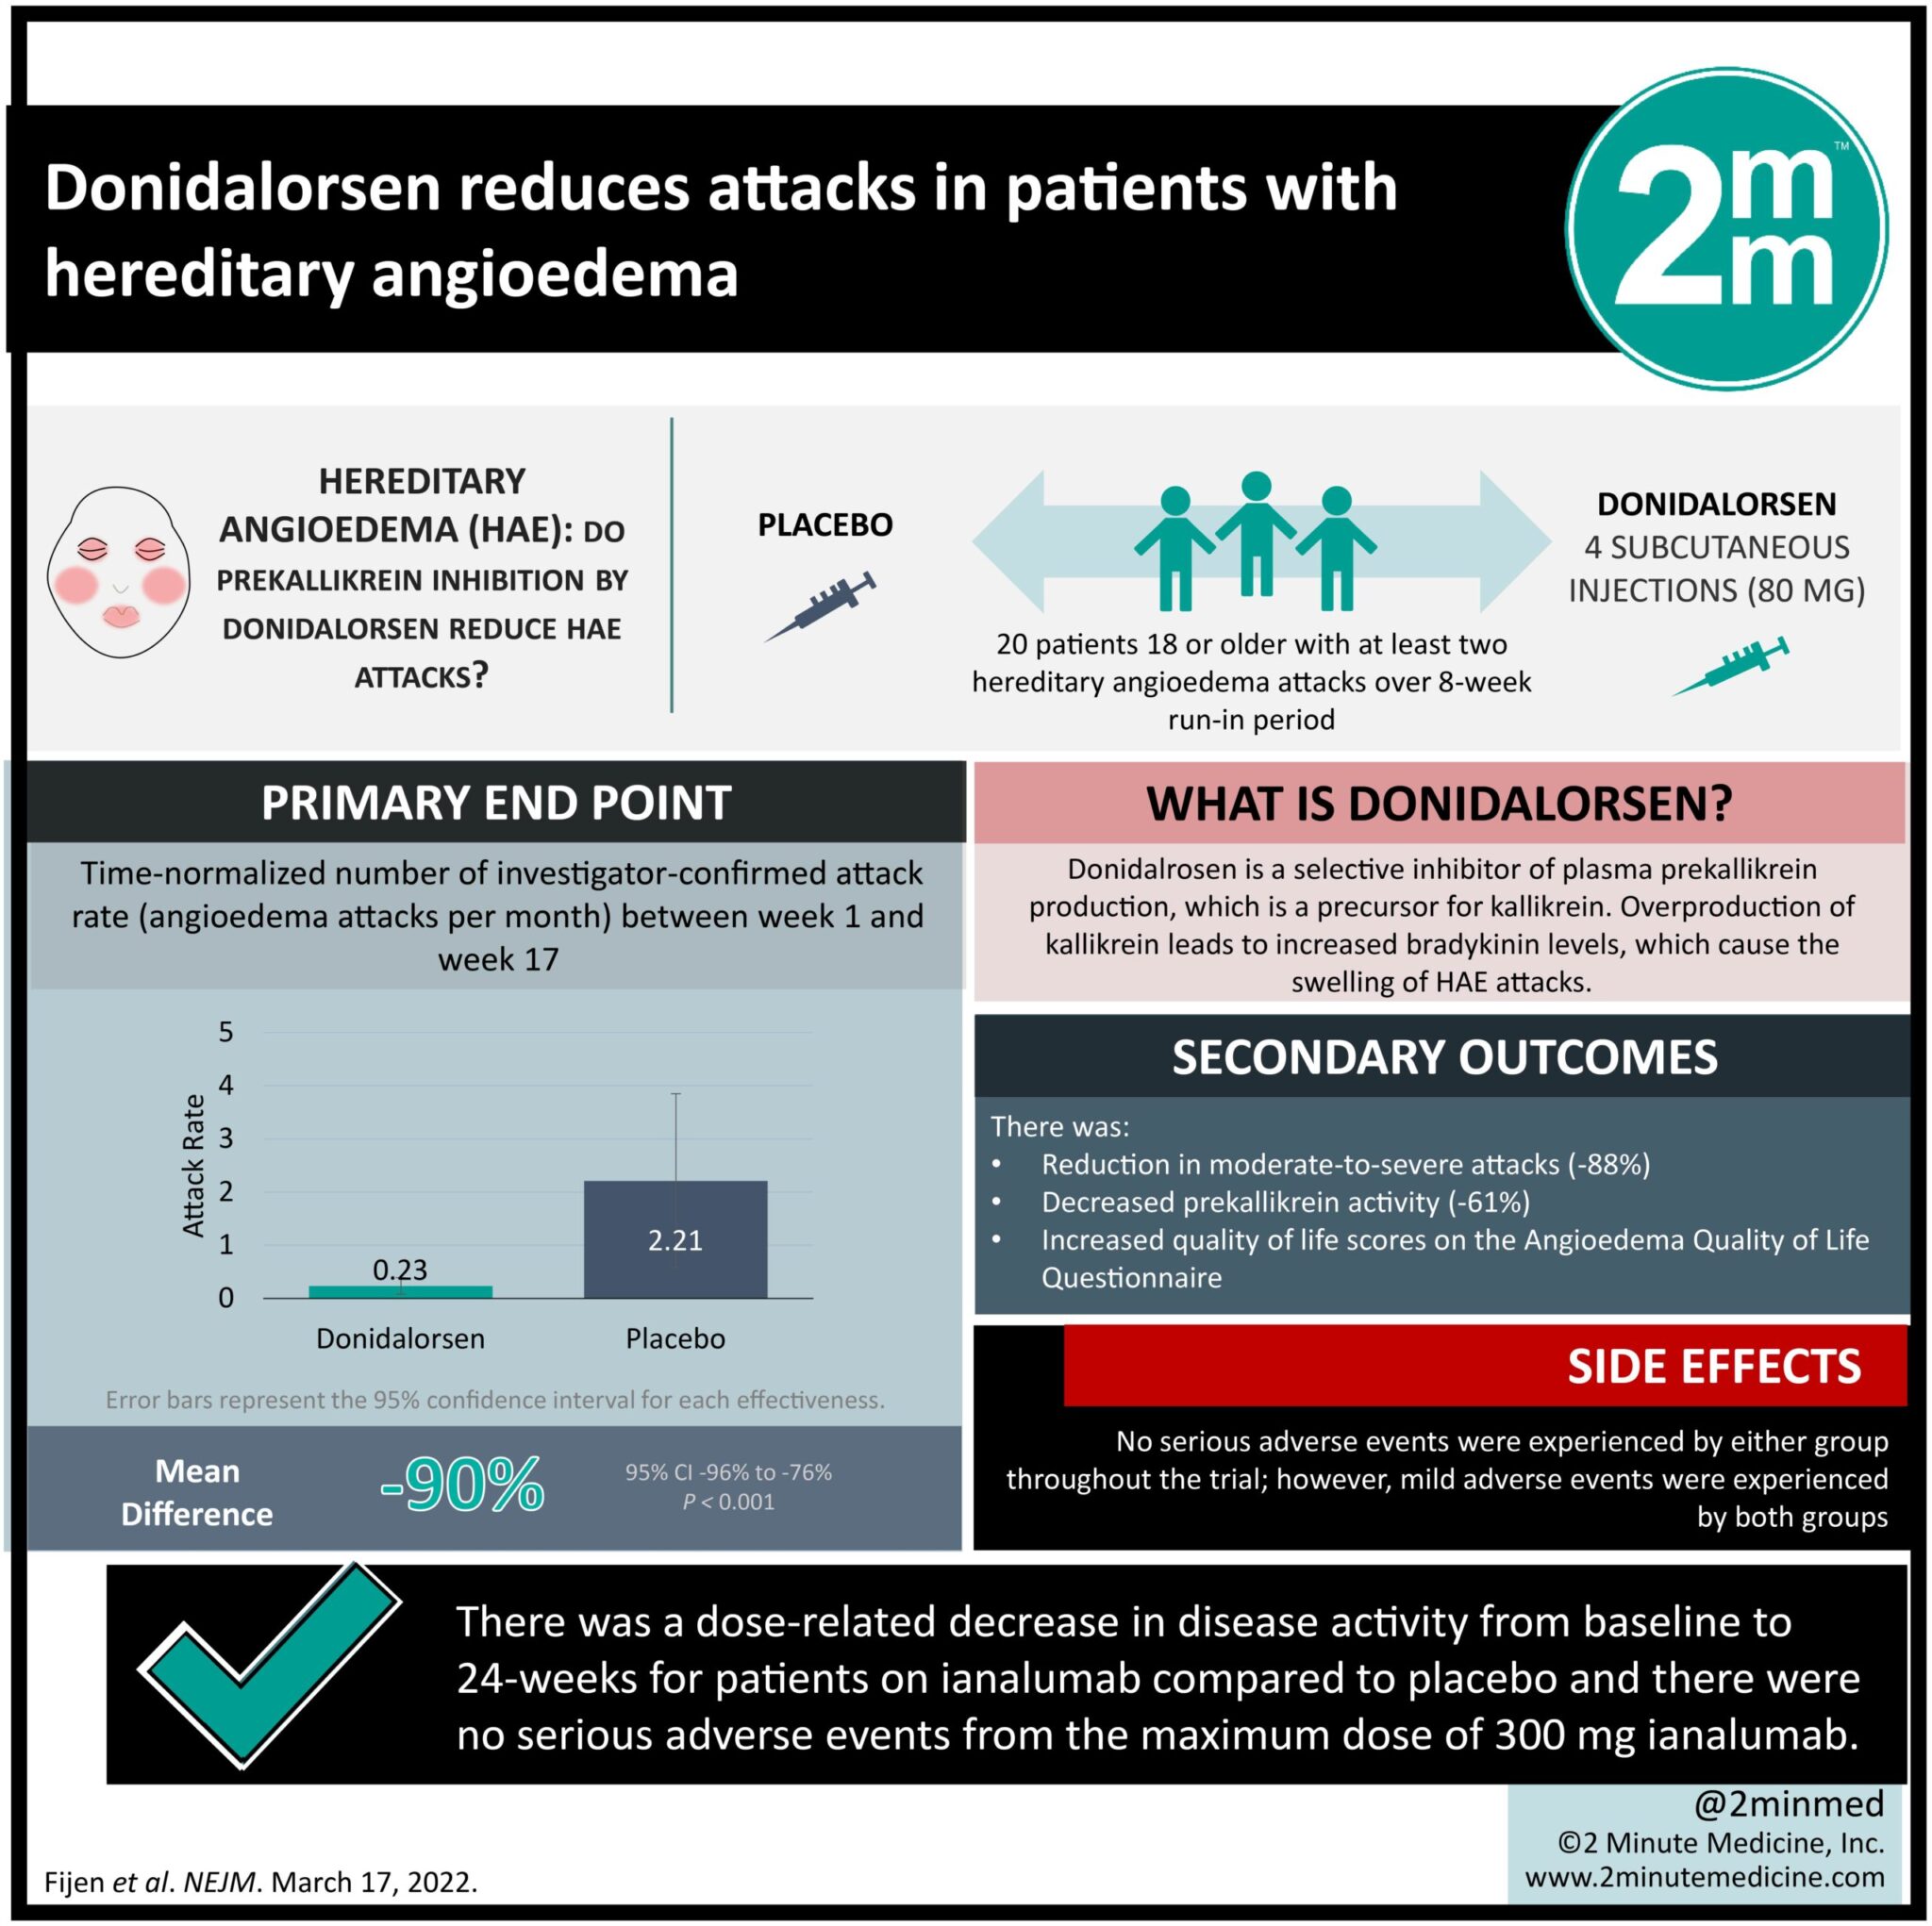 #VisualAbstract: Donidalorsen reduces attacks in patients with hereditary angioedema